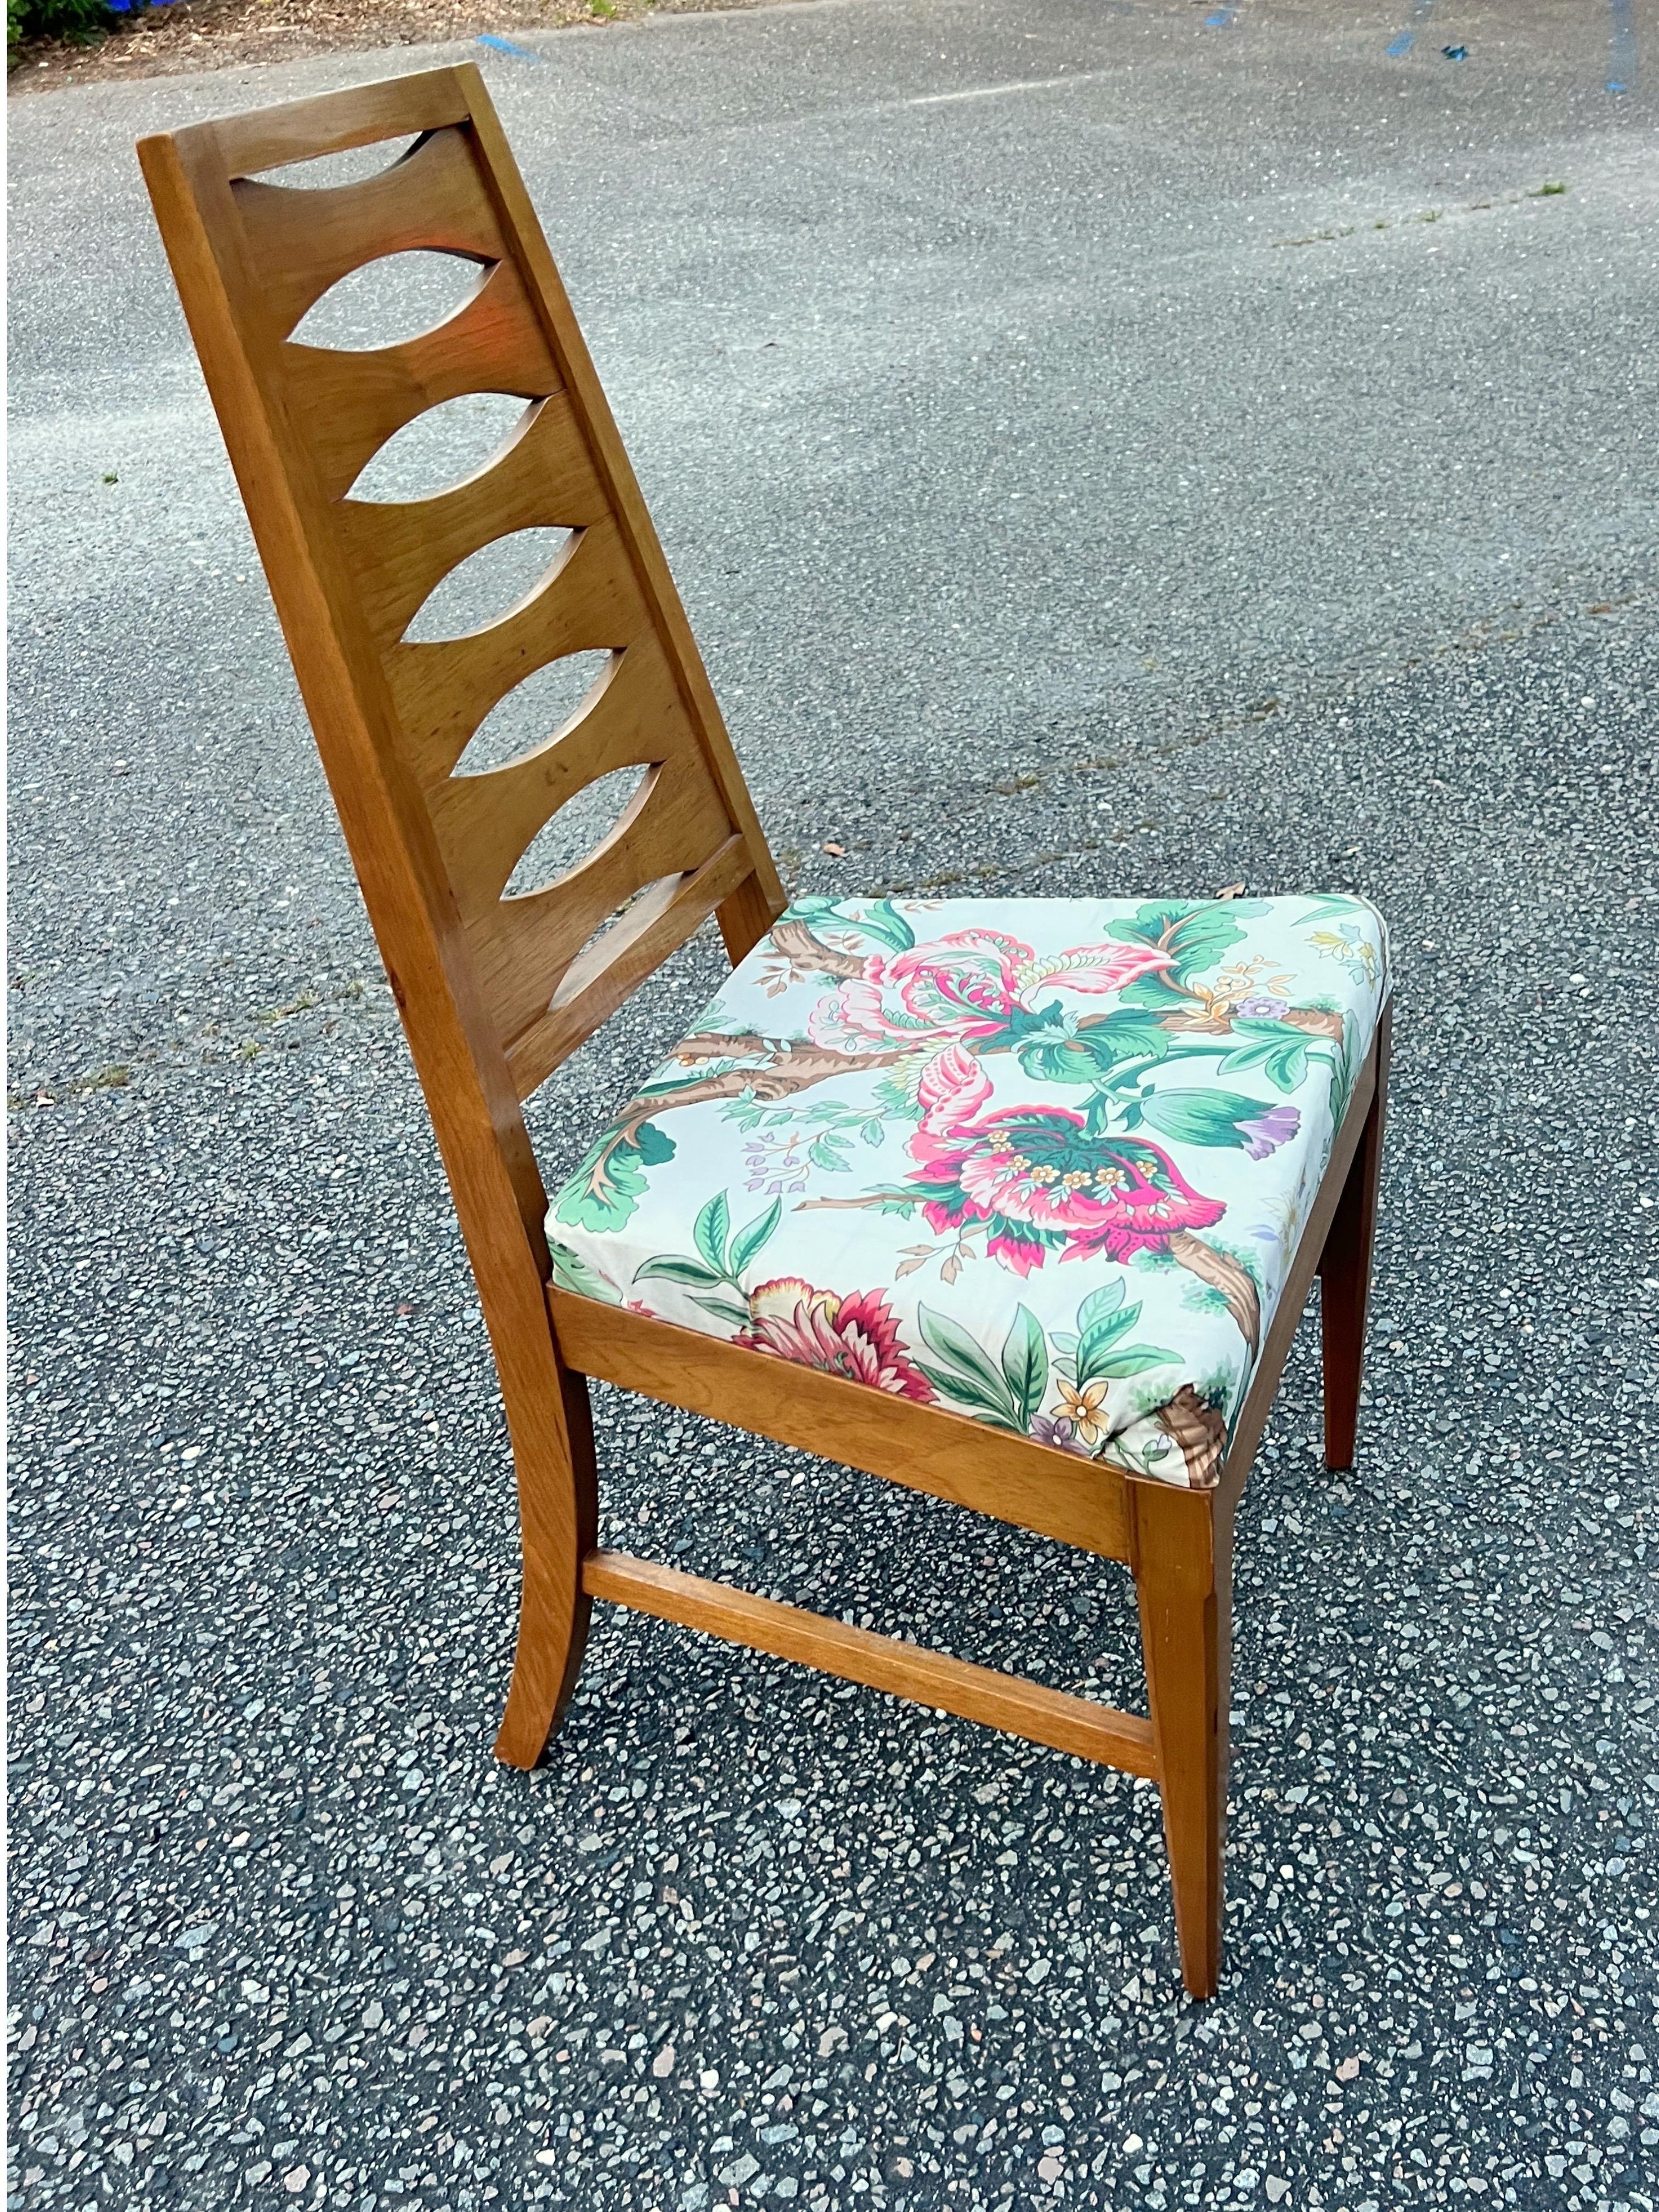 Vintage Mid Century Modern Walnut Tall Ladder Back Dining Chairs - Set of 6. Set includes (2) arm chairs, (4) side chairs, tapered ladder backs, beautiful wood grain, tapered legs, clean modernist lines, quality American craftsmanship. Circa Mid